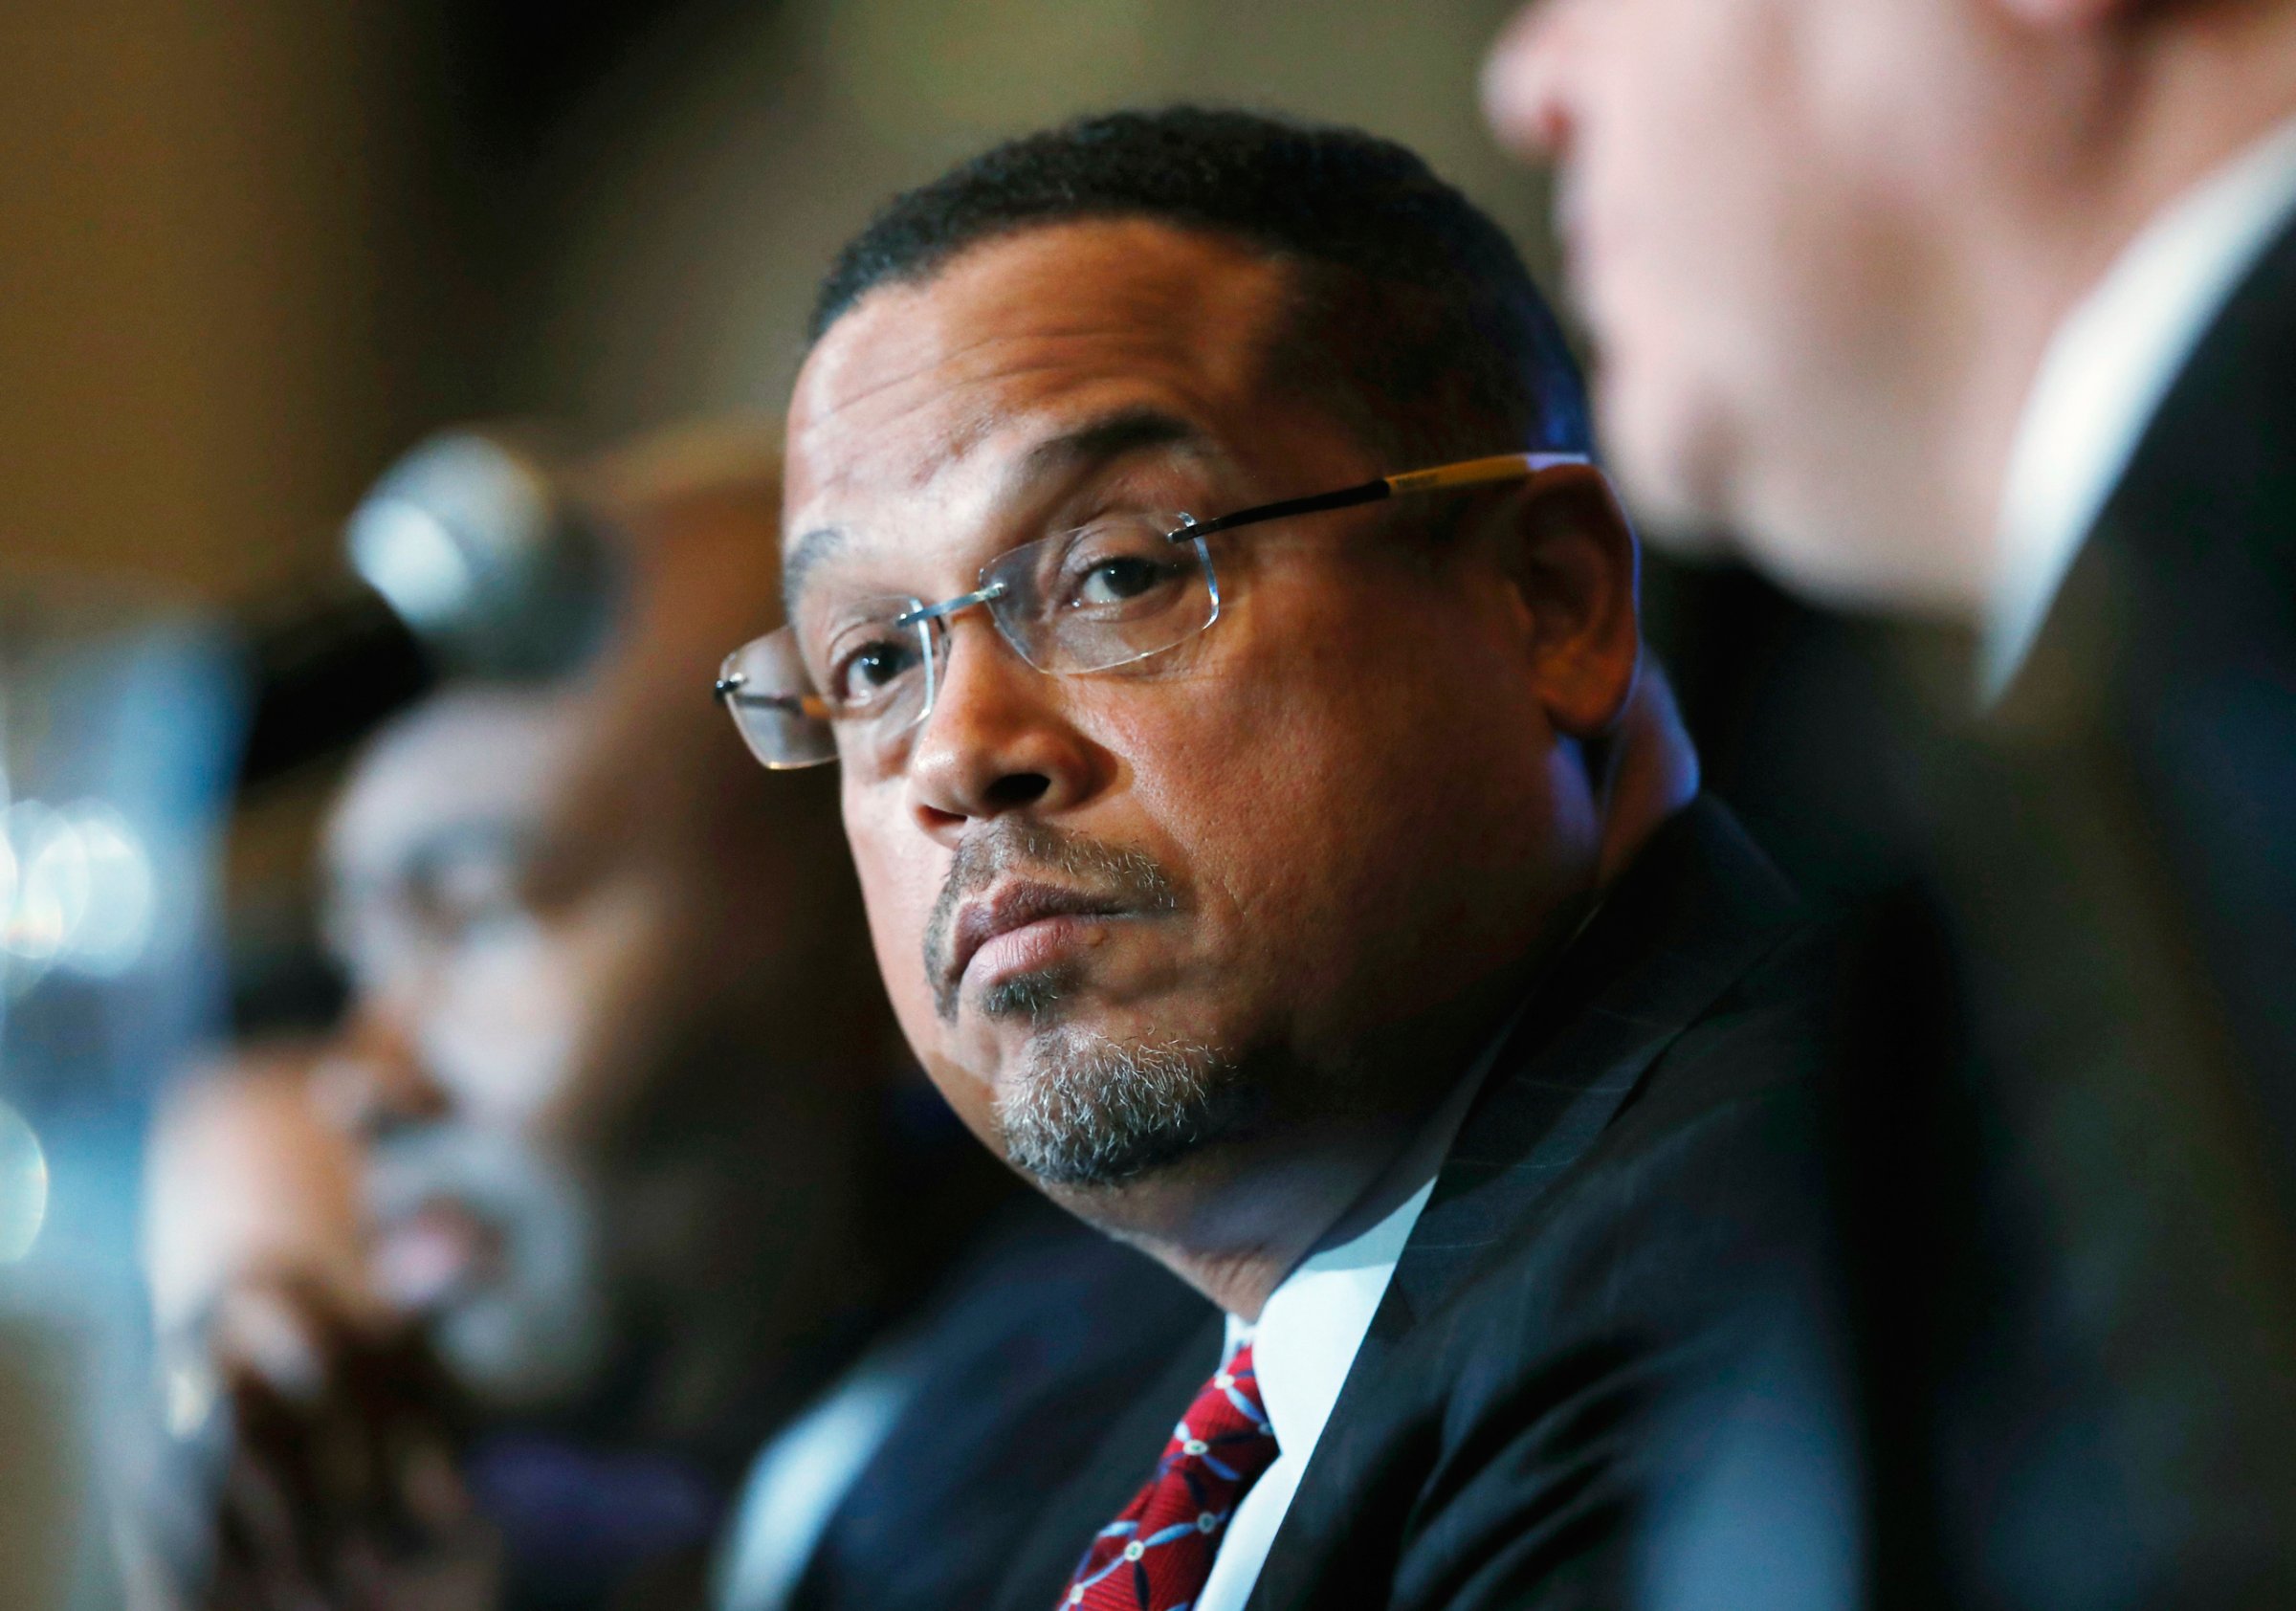 FILE - In this Dec. 2, 2016 file photo, U.S. Rep. Keith Ellison, D-Minn., listens during a forum on the future of the Democratic Party, in Denver. Ellison, who is currently running to be the next chair of the Democratic National Committee, announced Monday, Jan. 16, 2017, he is boycotting Donald Trump's presidential inauguration on Friday. (AP Photo/David Zalubowski, File)